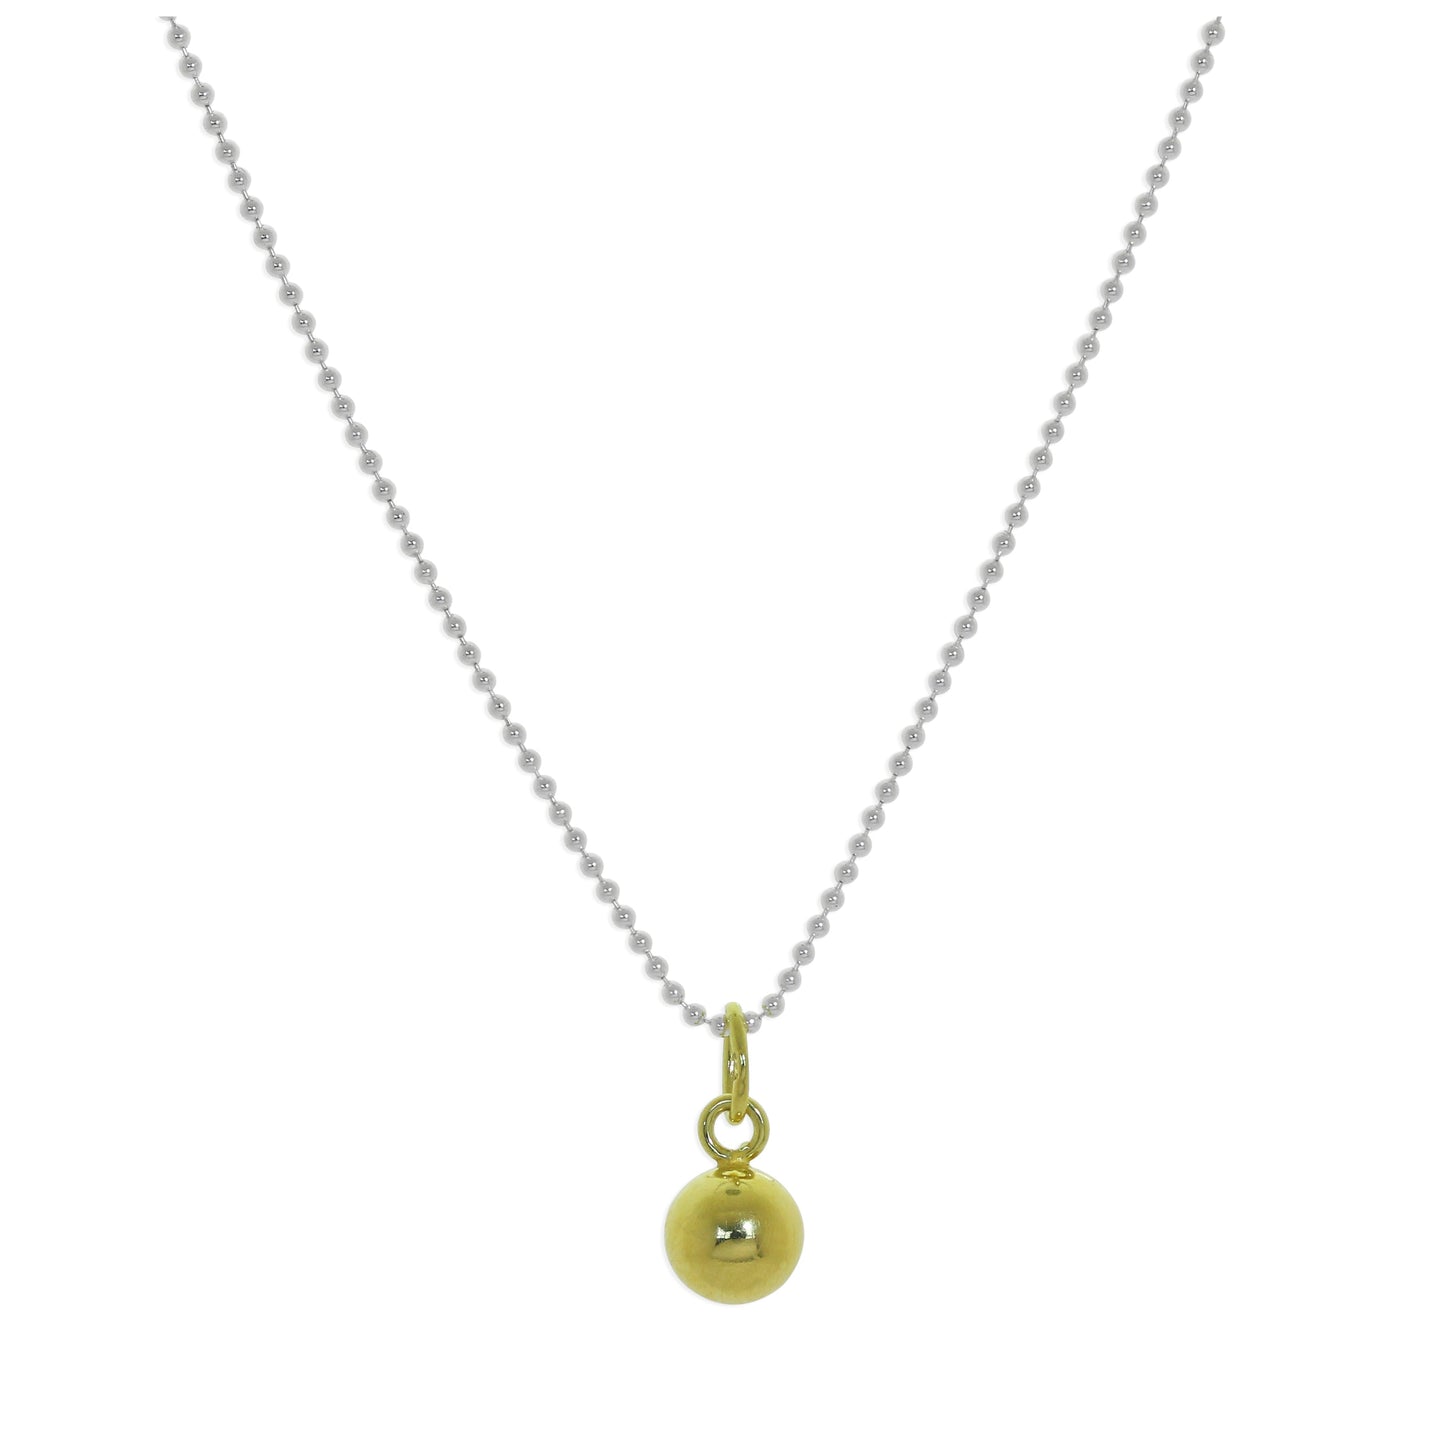 Gold Plated Sterling Silver Christmas Bauble Necklace - 14 - 22 Inches